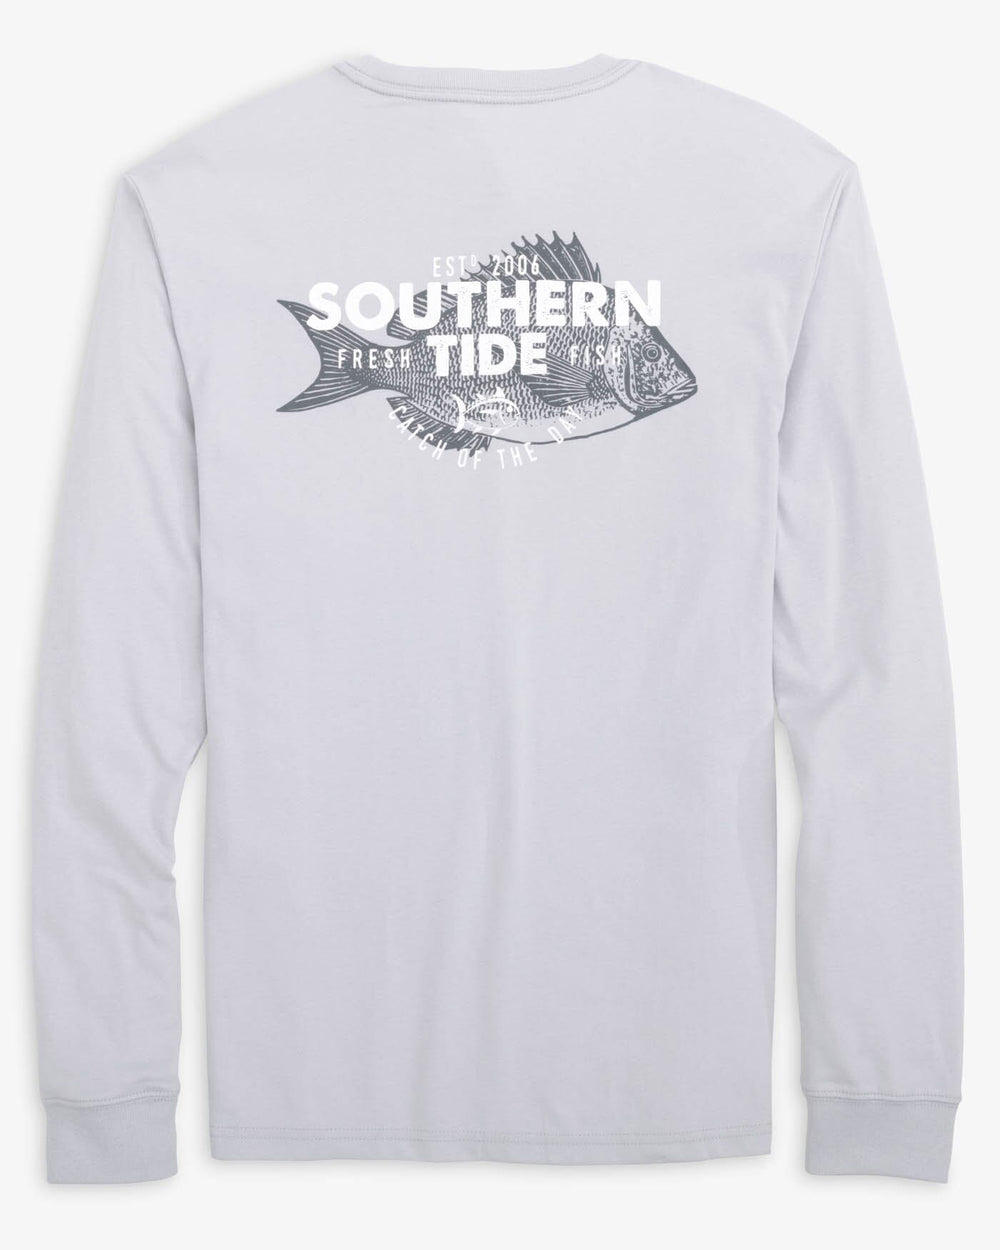 Men's Catch of The Day Long Sleeve T-Shirt | Southern Tide